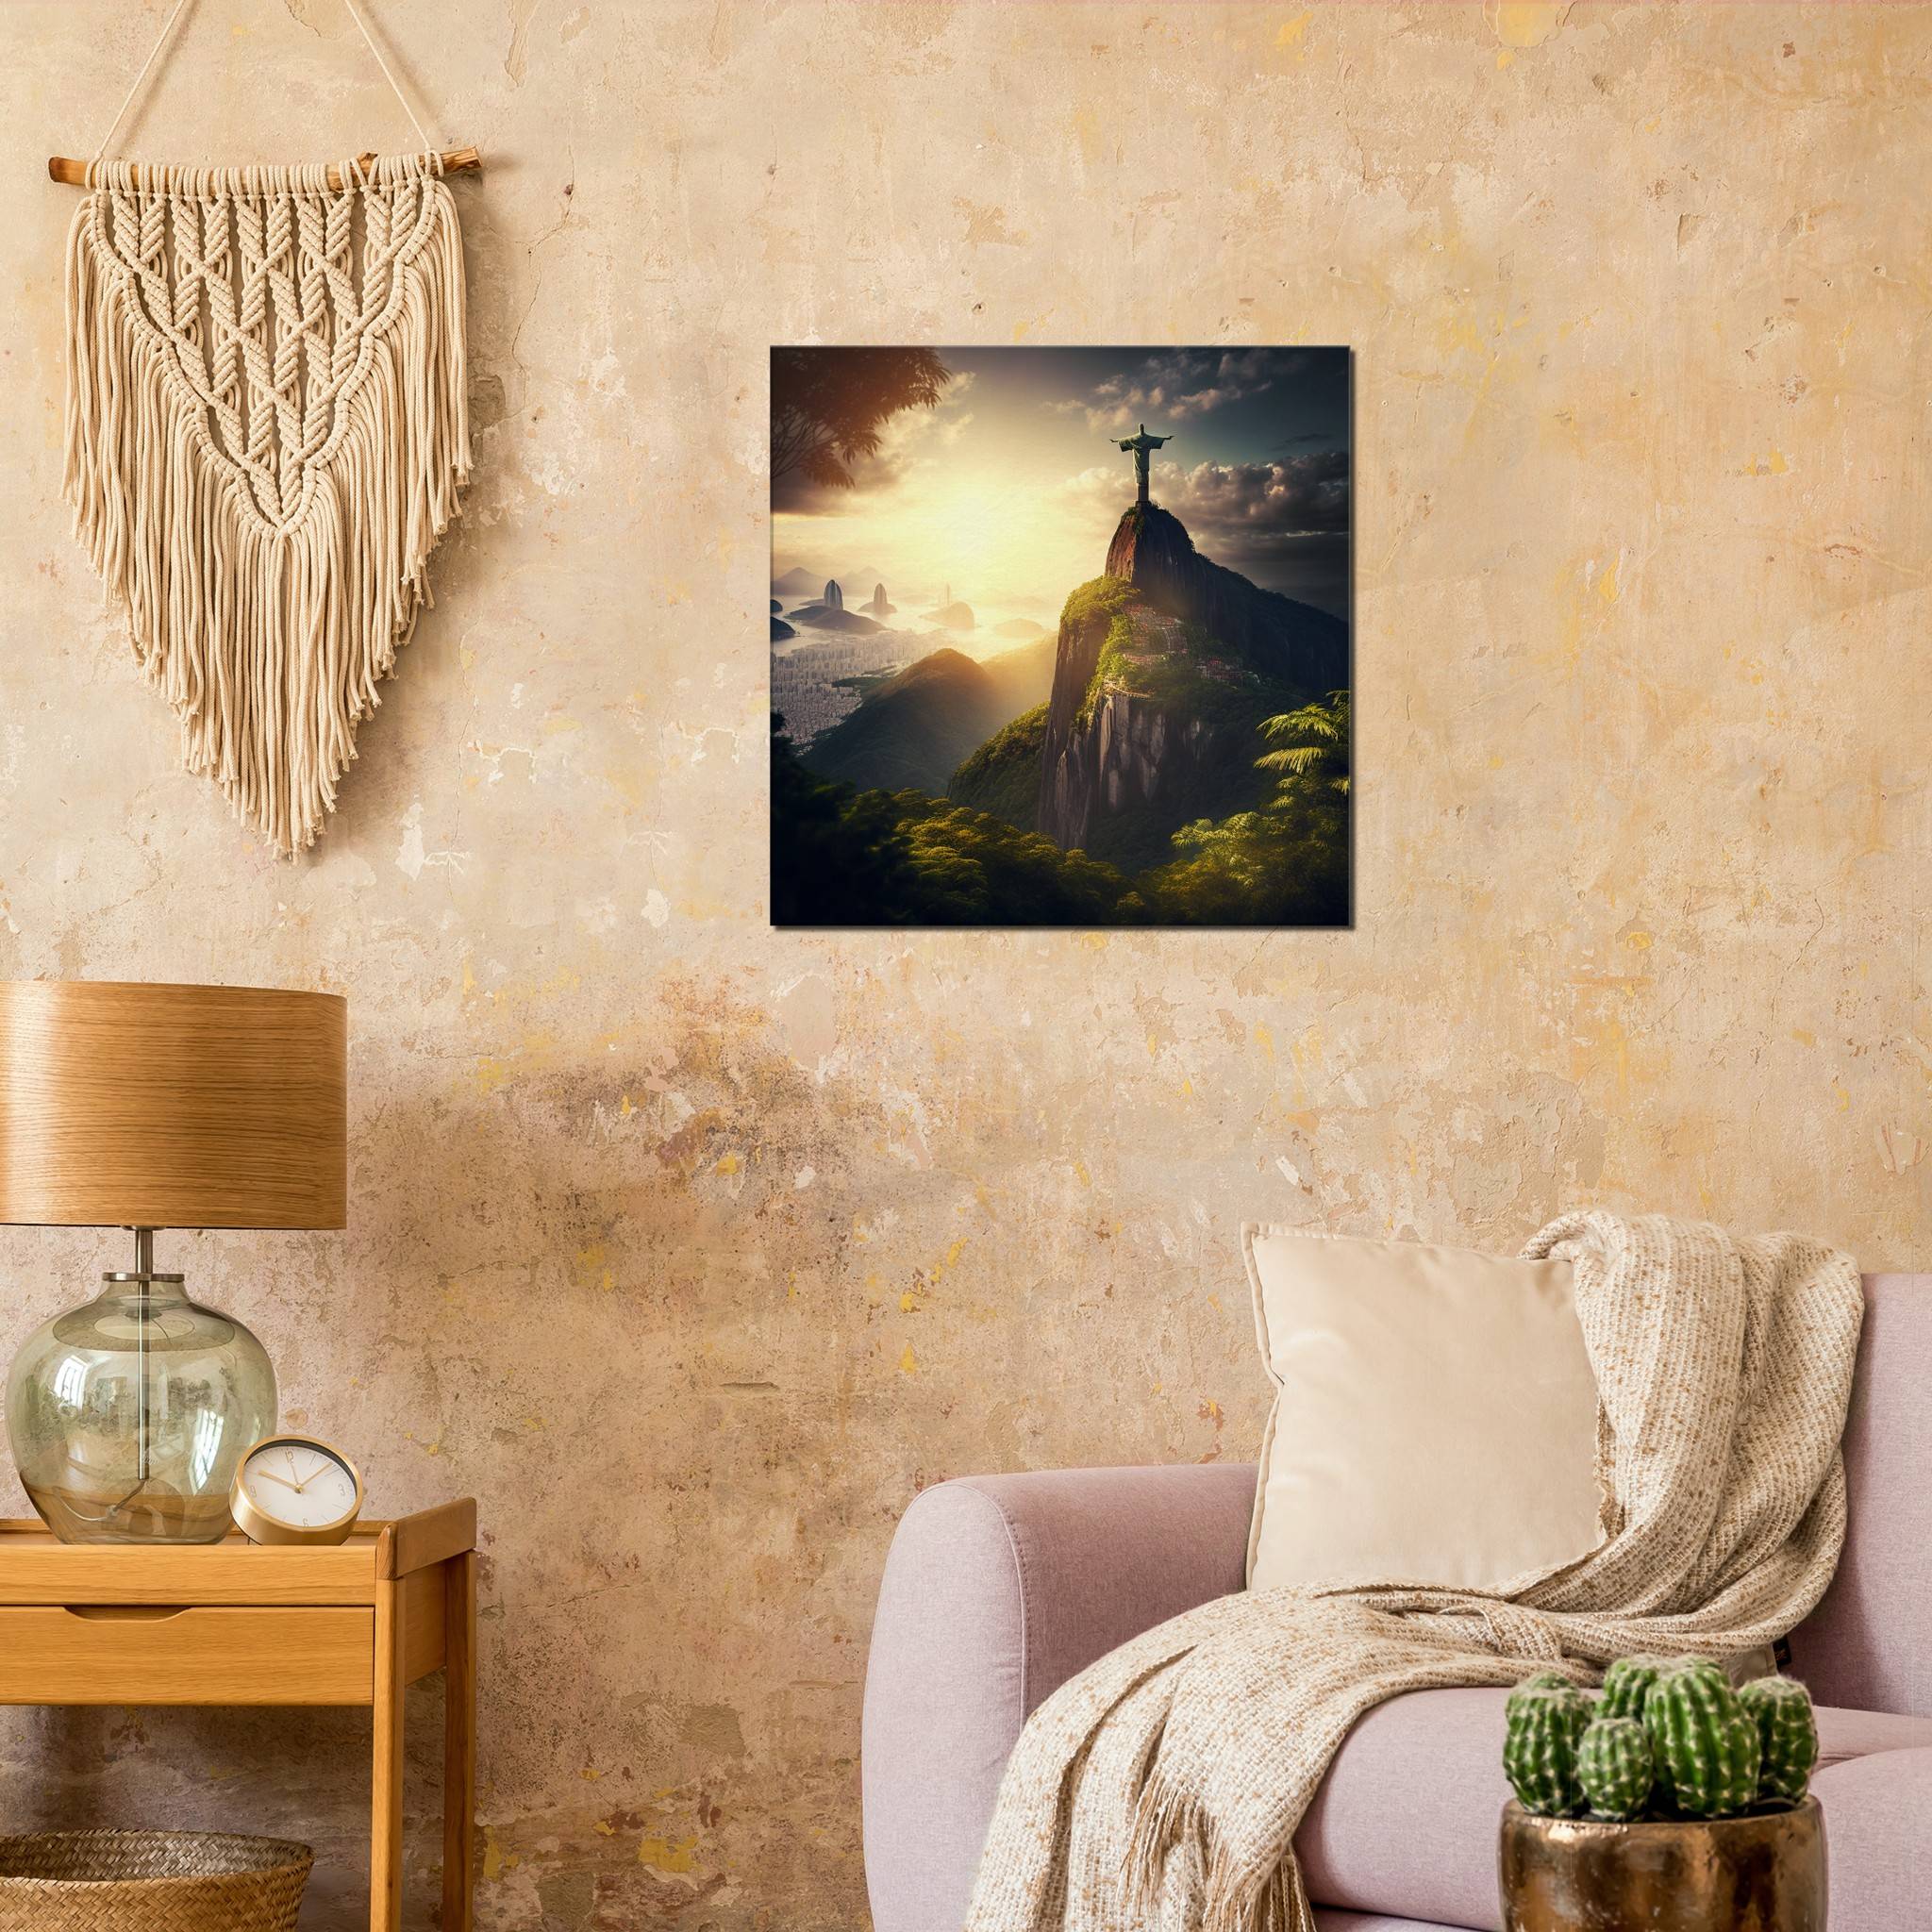 Christ the Redeemer 7 / 60 x 60cm (Canvas Print) Canvas Print Canvas reproduction The Pianist Print On Demand Fabled Gallery https://fabledgallery.art/product/christ-the-redeemer-7-60-x-60cm-canvas-print/